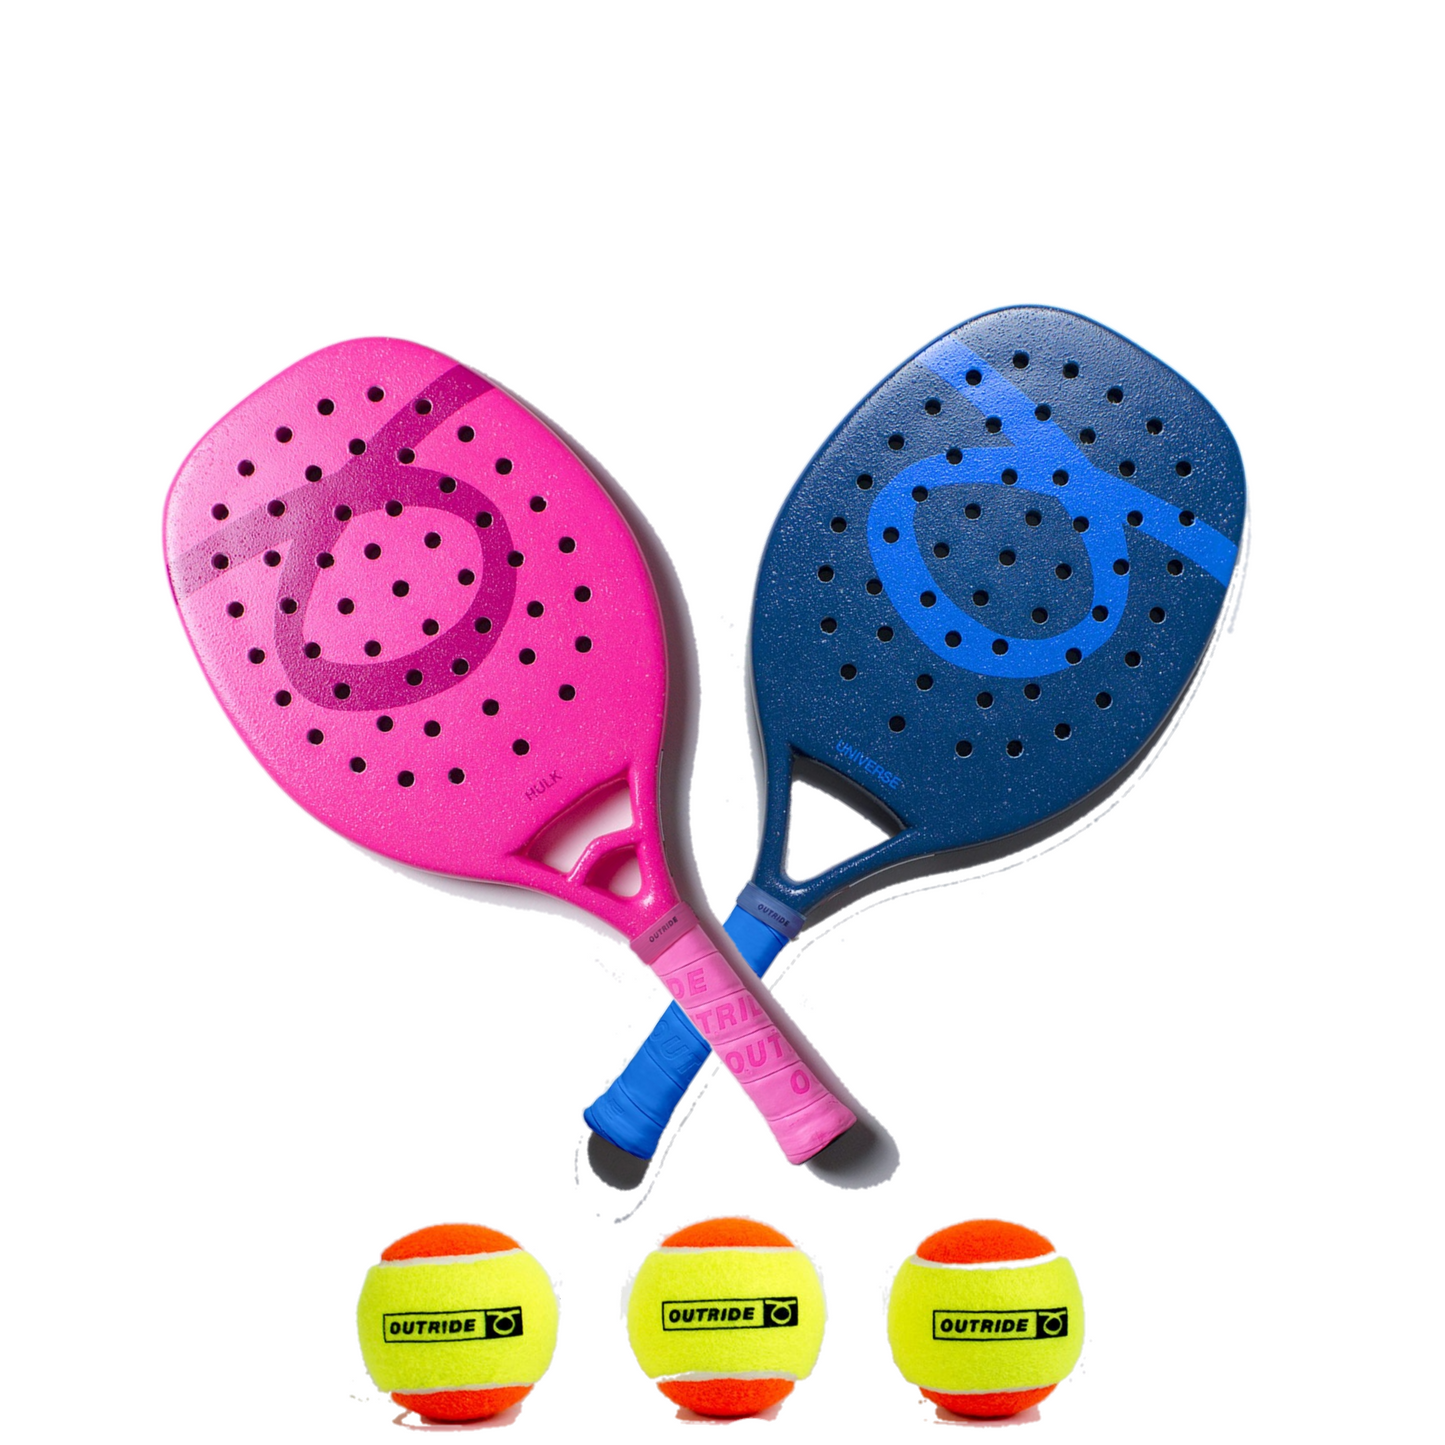 2 Paddle Universe and Hulk Pink Paddle Package - Alpha Beach Tennis